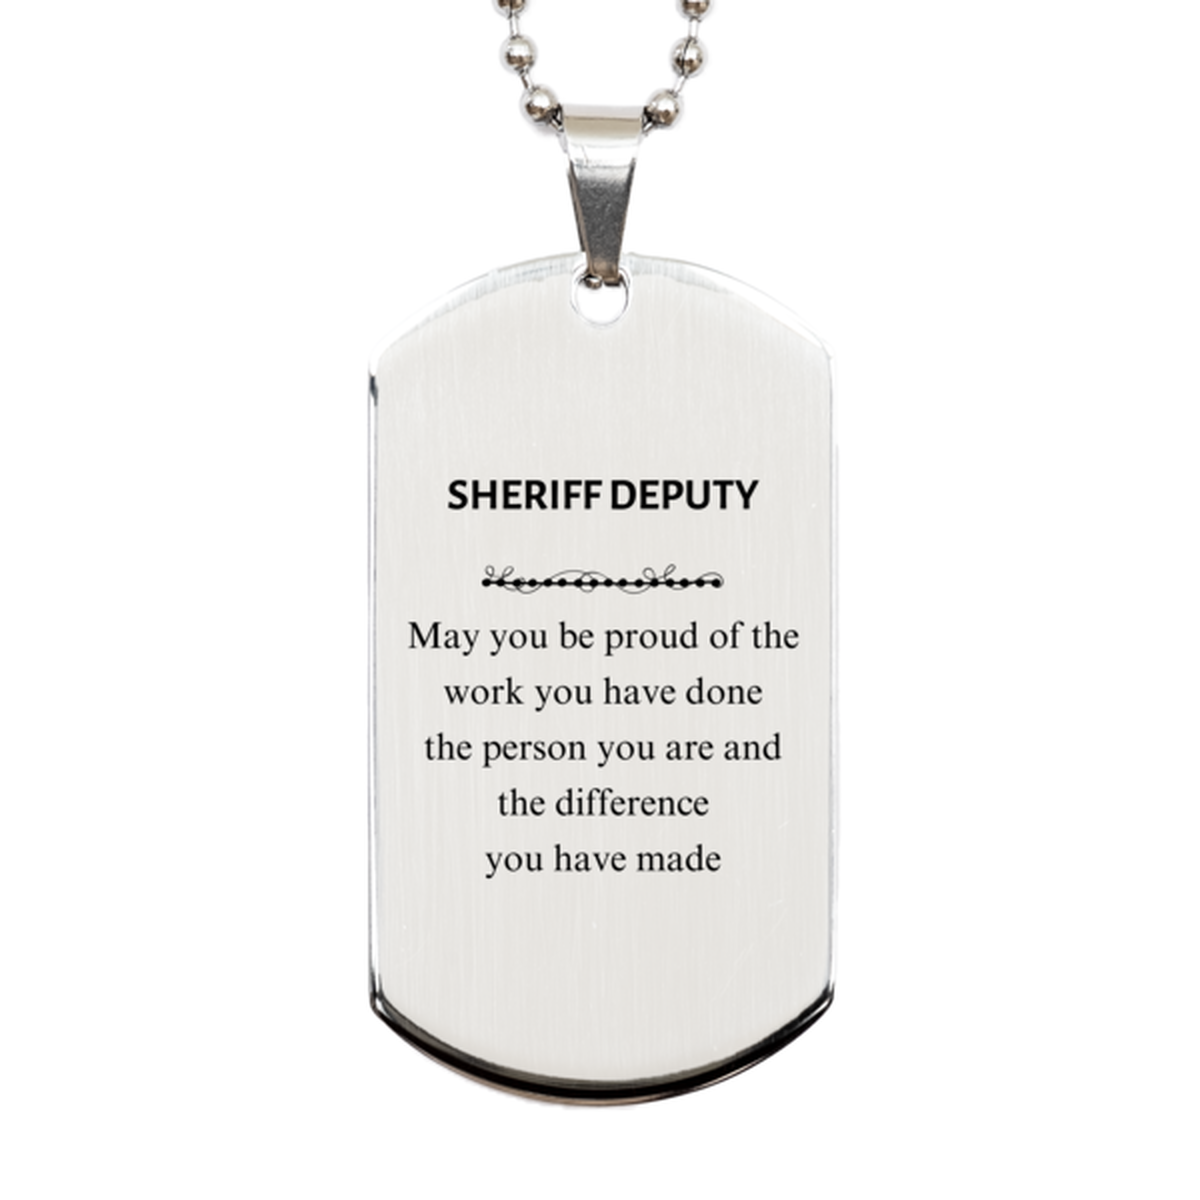 Sheriff Deputy May you be proud of the work you have done, Retirement Sheriff Deputy Silver Dog Tag for Colleague Appreciation Gifts Amazing for Sheriff Deputy